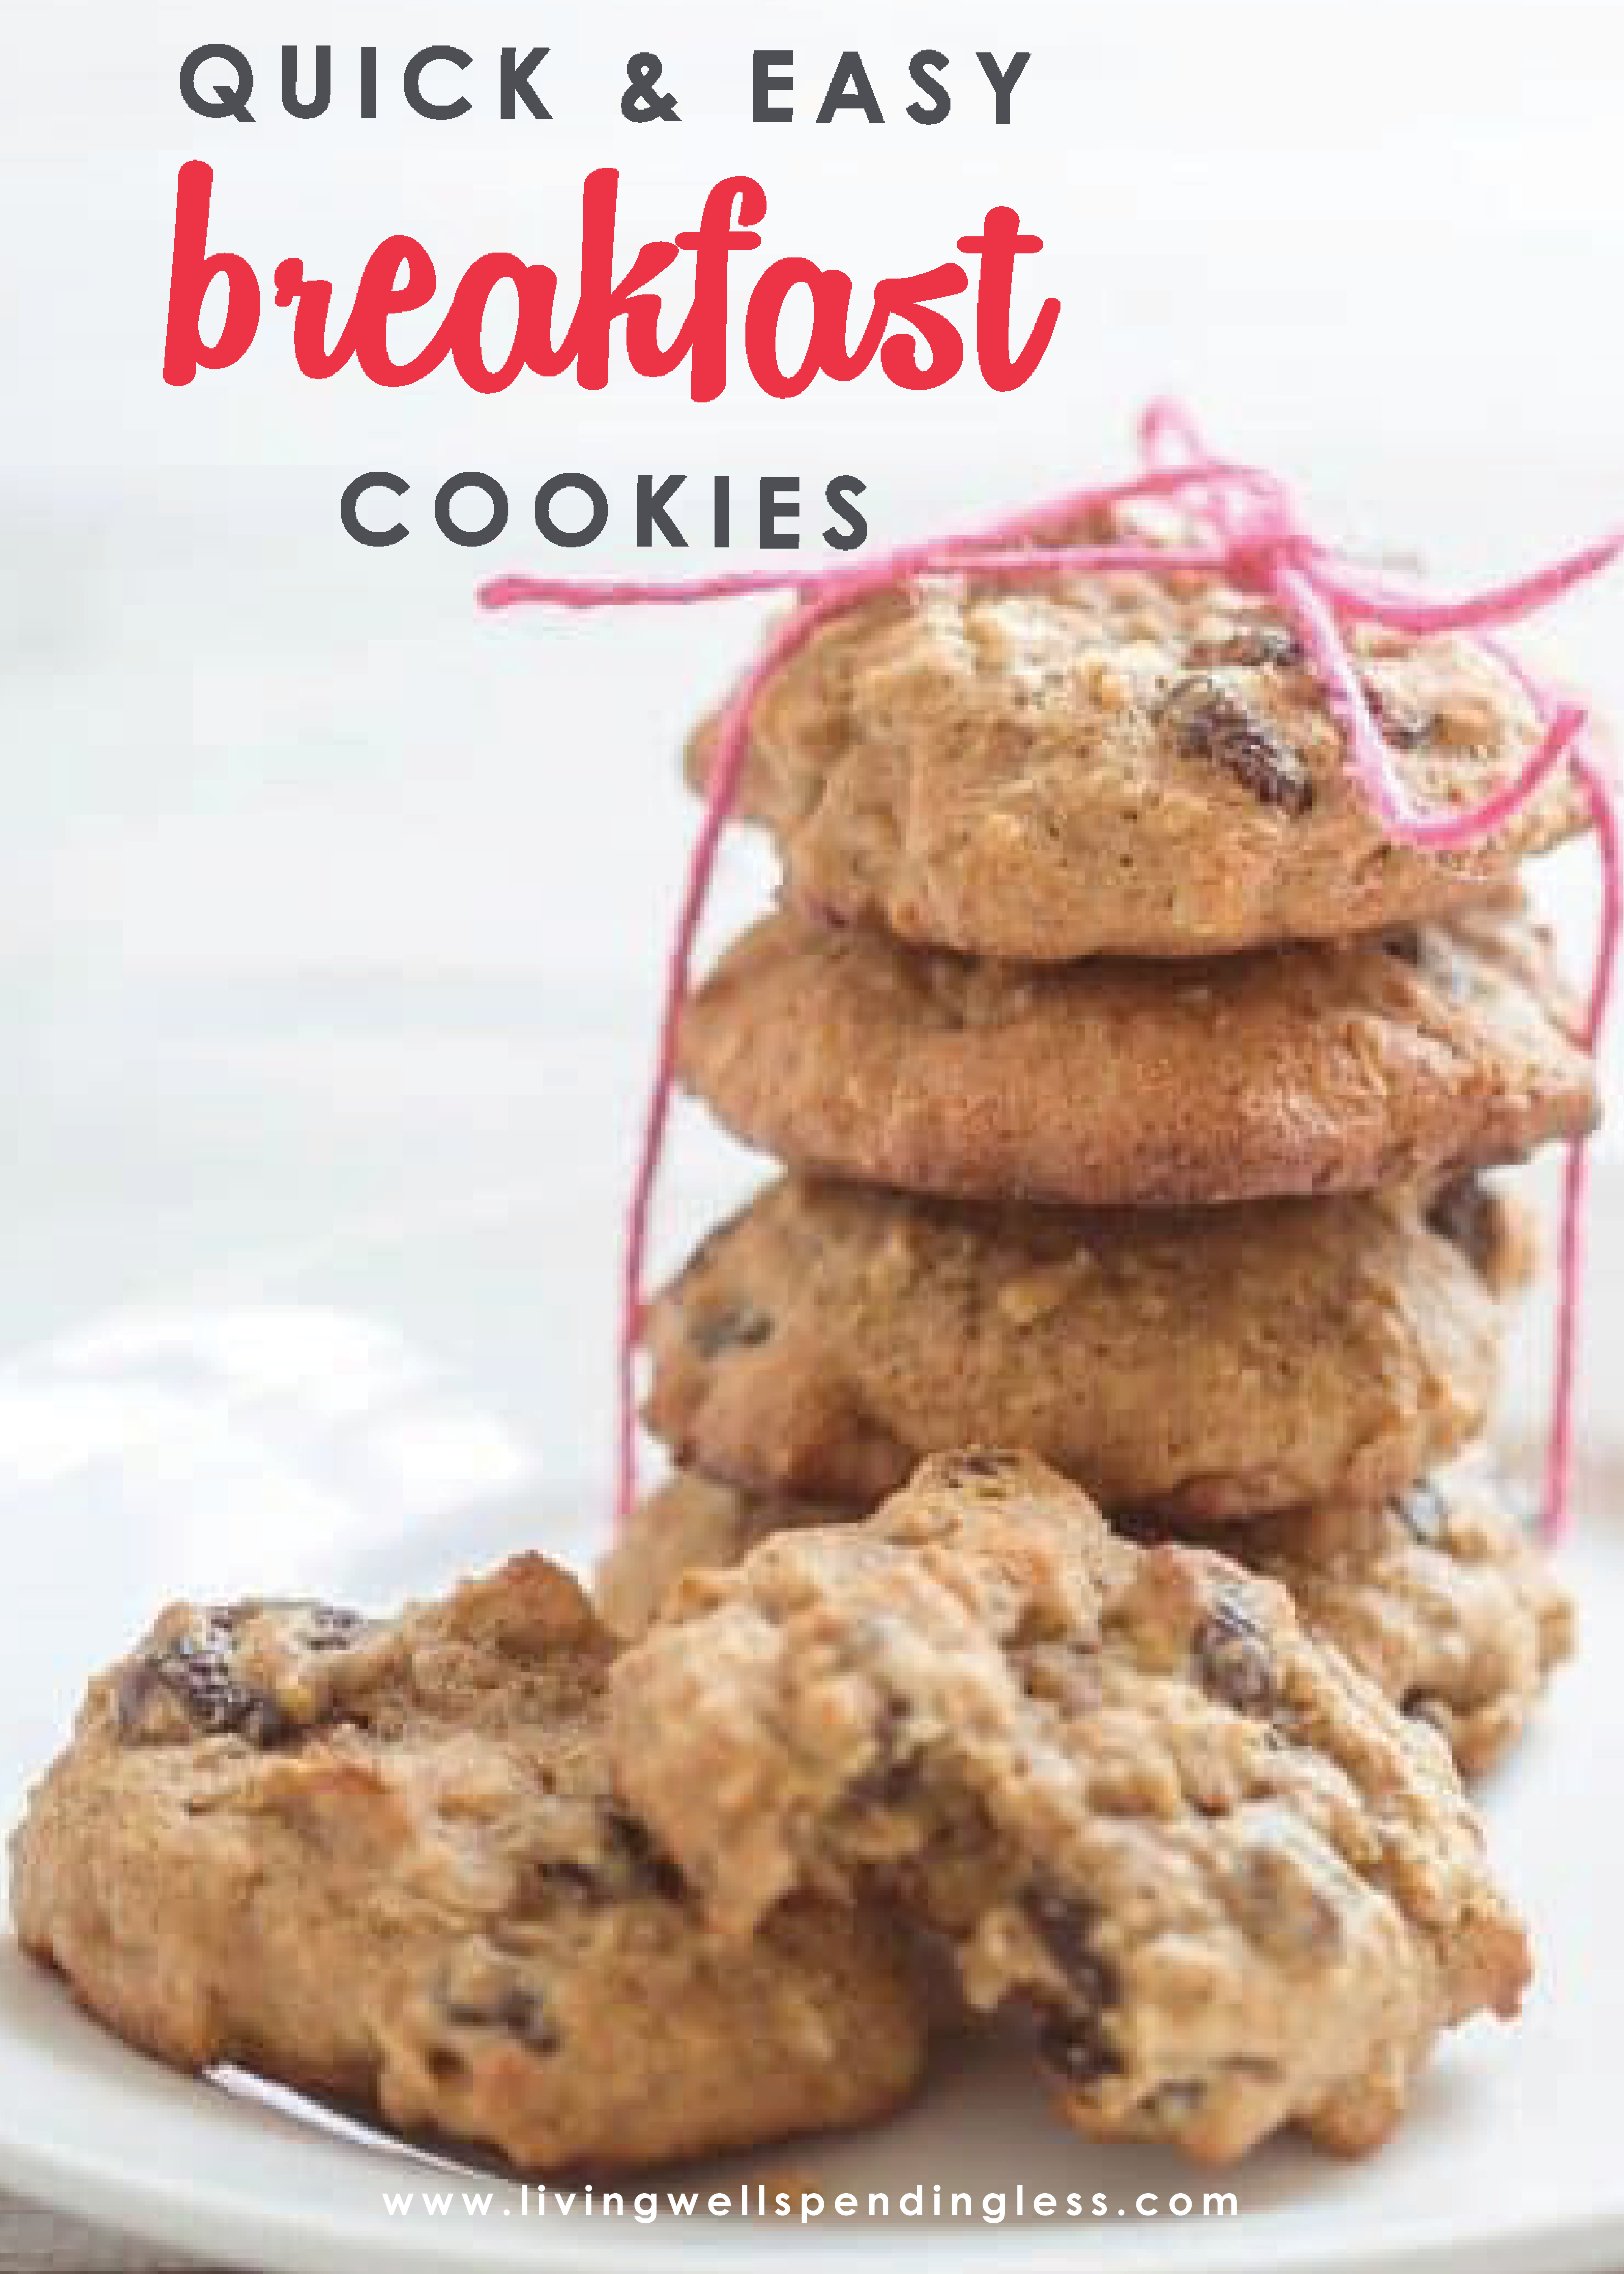 Are chaotic mornings getting the best of you? Breakfast is the most important meal of the day, but sometimes that's easier said than done. Luckily these Quick & Easy Breakfast Cookies are chock full of healthy goodness, taste great, and are freezer friendly too! The perfect solution for a healthy snack or breakfast on the go!